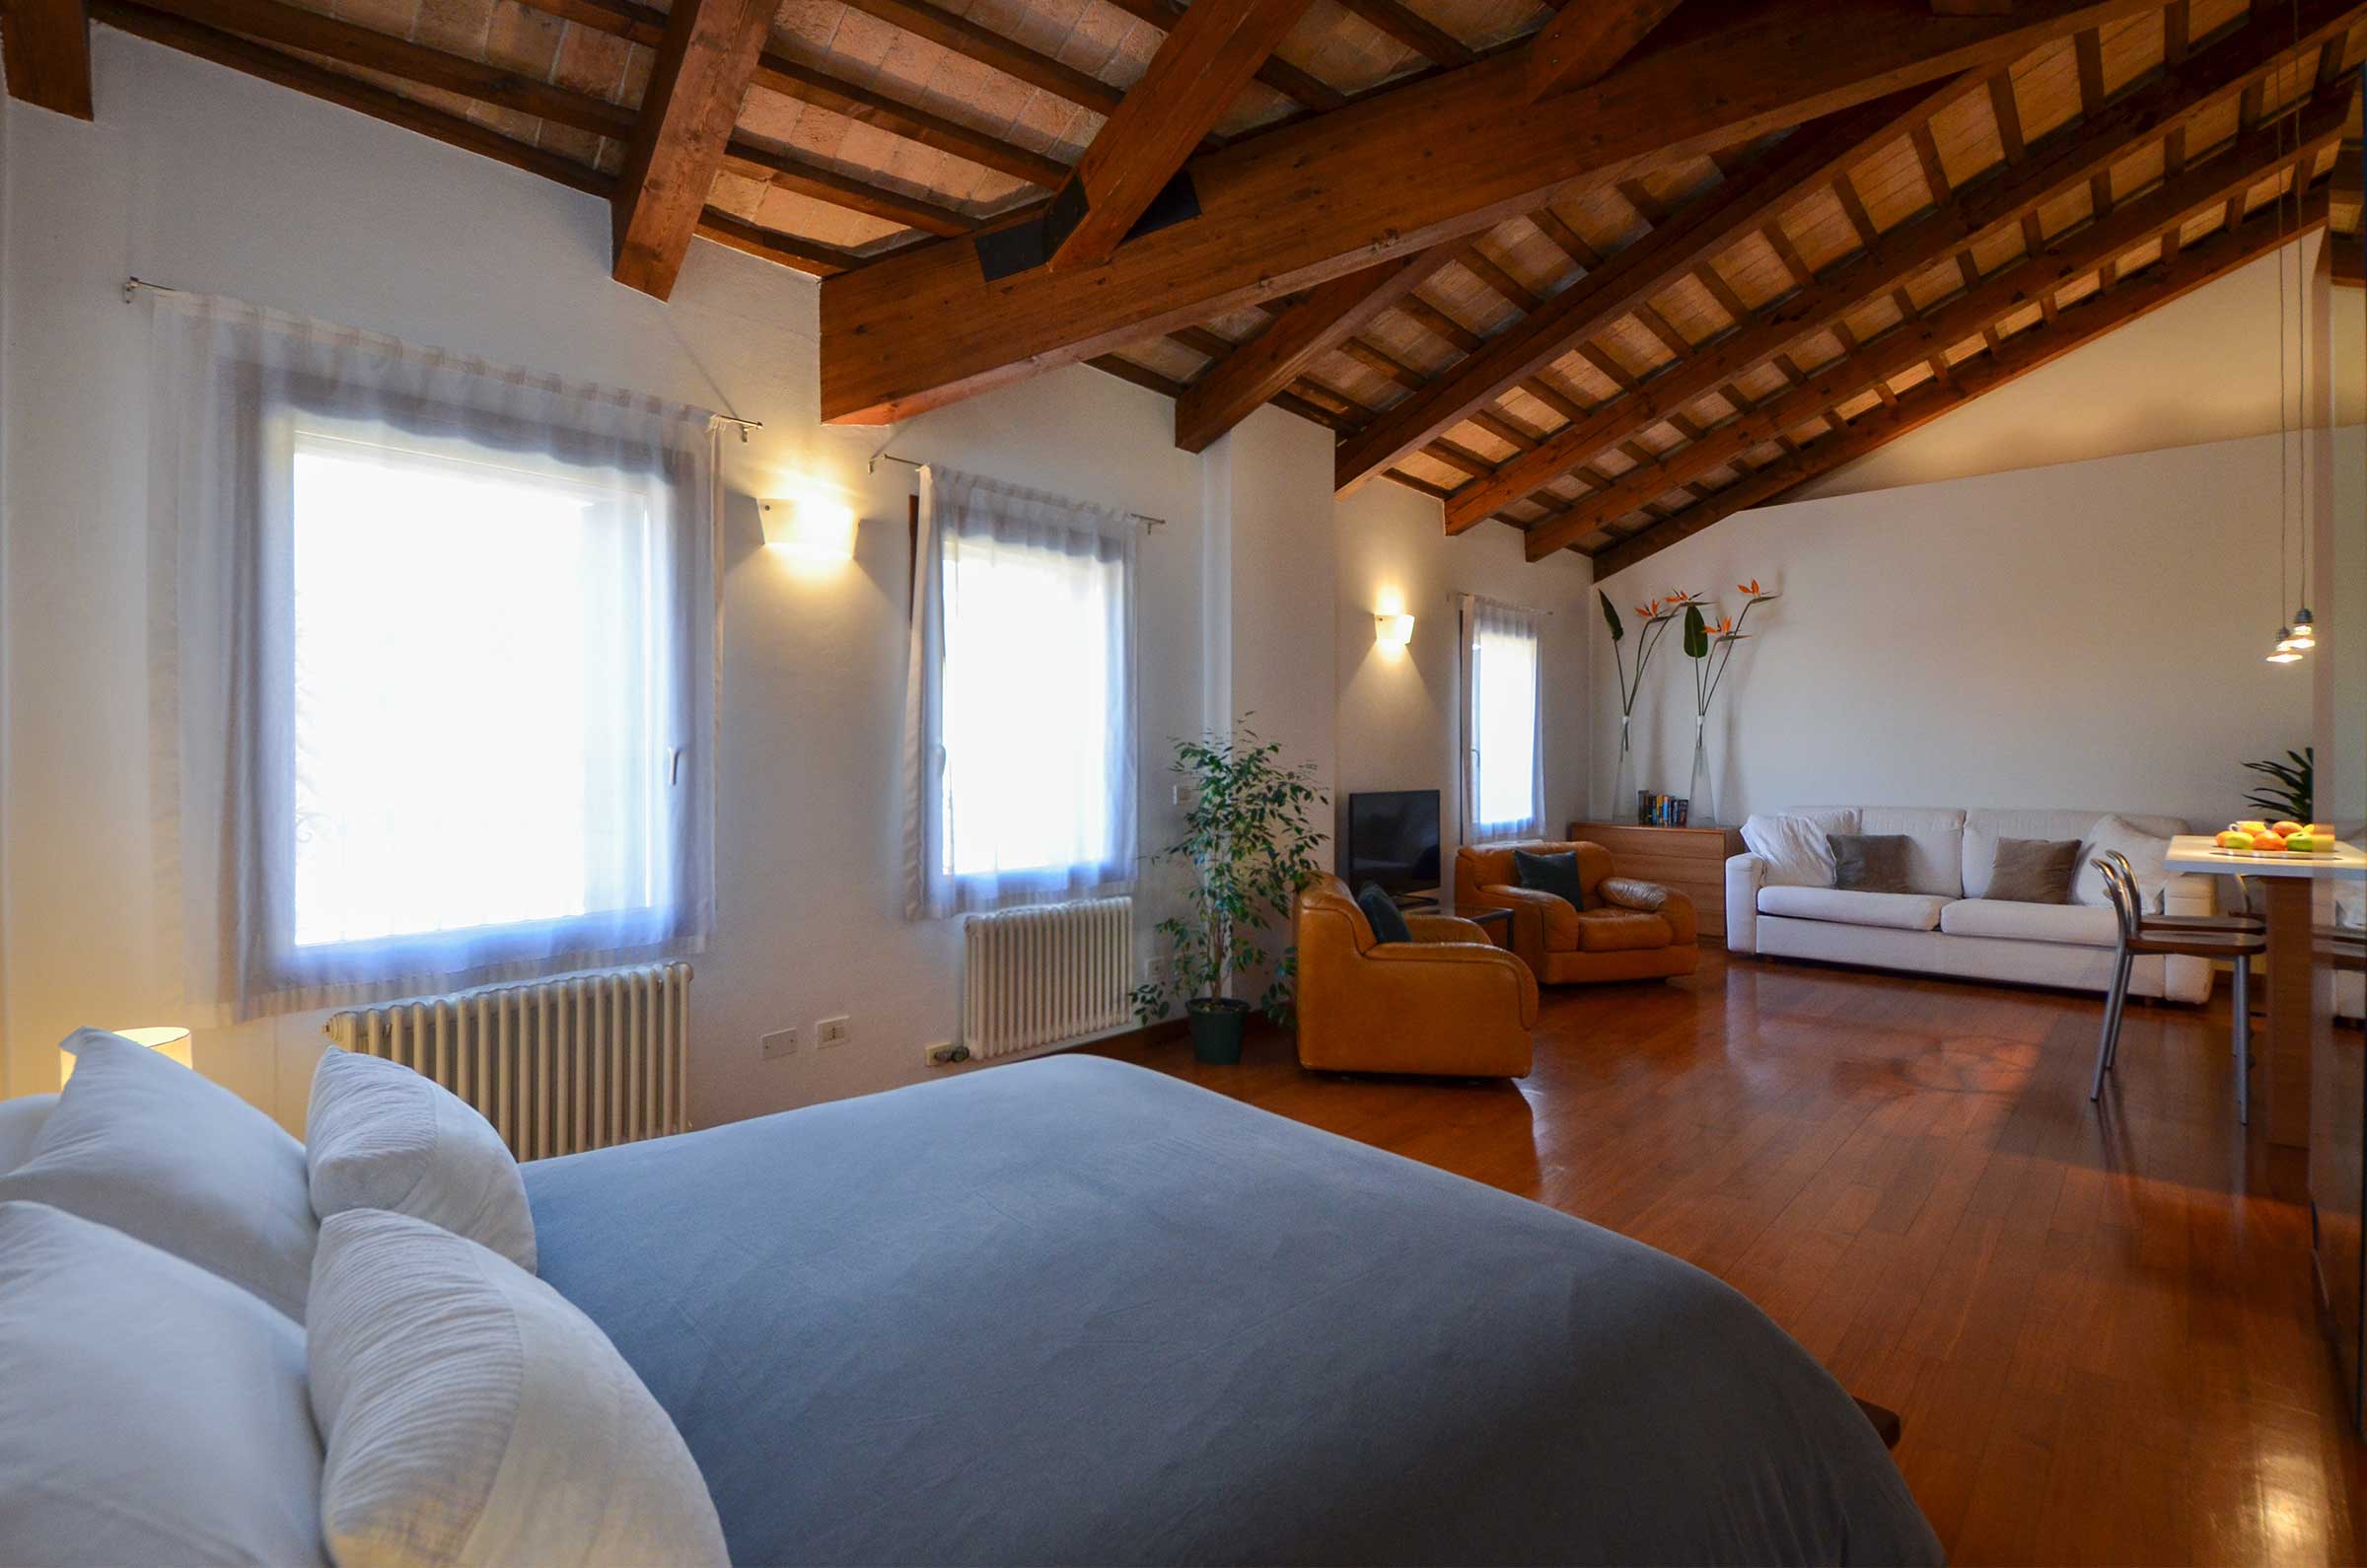 the Greci Studio is perfect also for long term stays